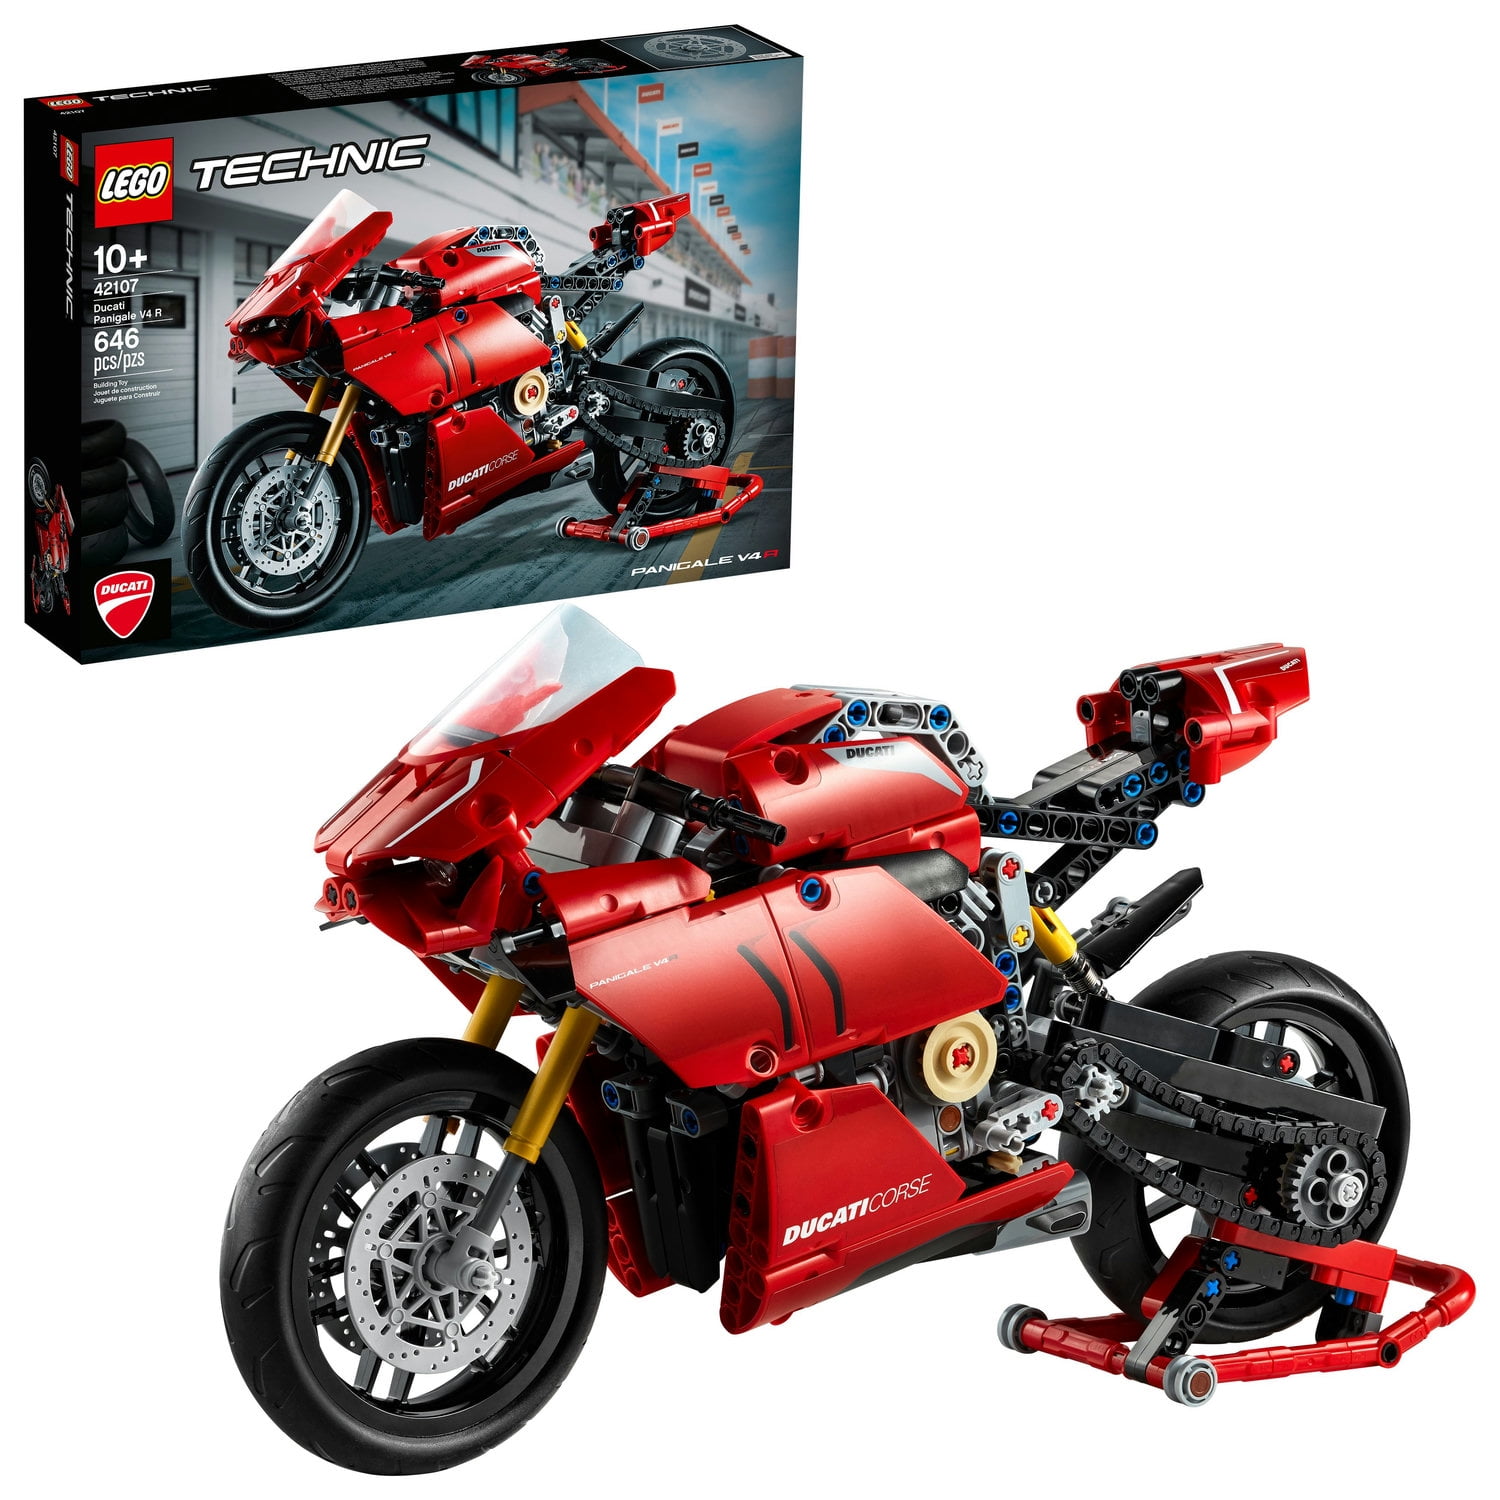 NEW LEGO CITY MOTORCYCLE with BLACK CHASSIS & LONG FAIRING MOUNTS FREE GIFT 